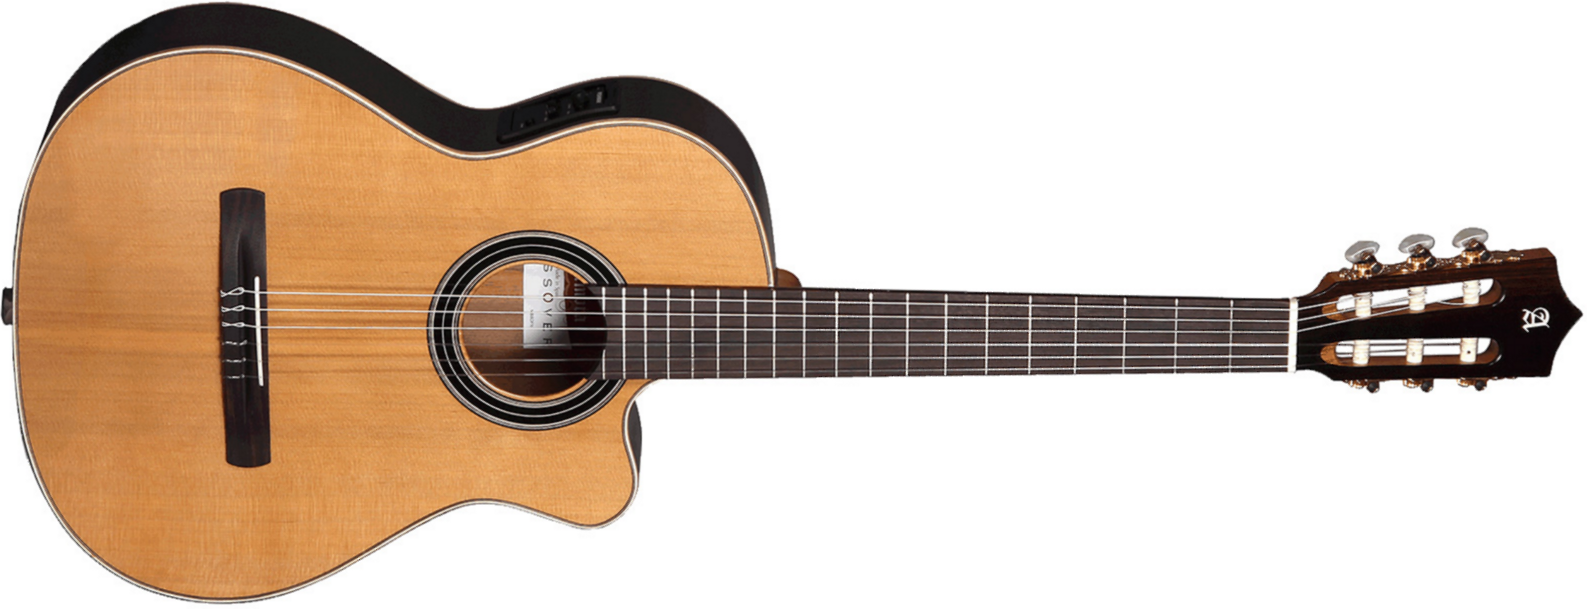 Alhambra Cs-lr Cw E1 Cross-over Cedre Palissandre Rw - Natural - Classical guitar 4/4 size - Main picture